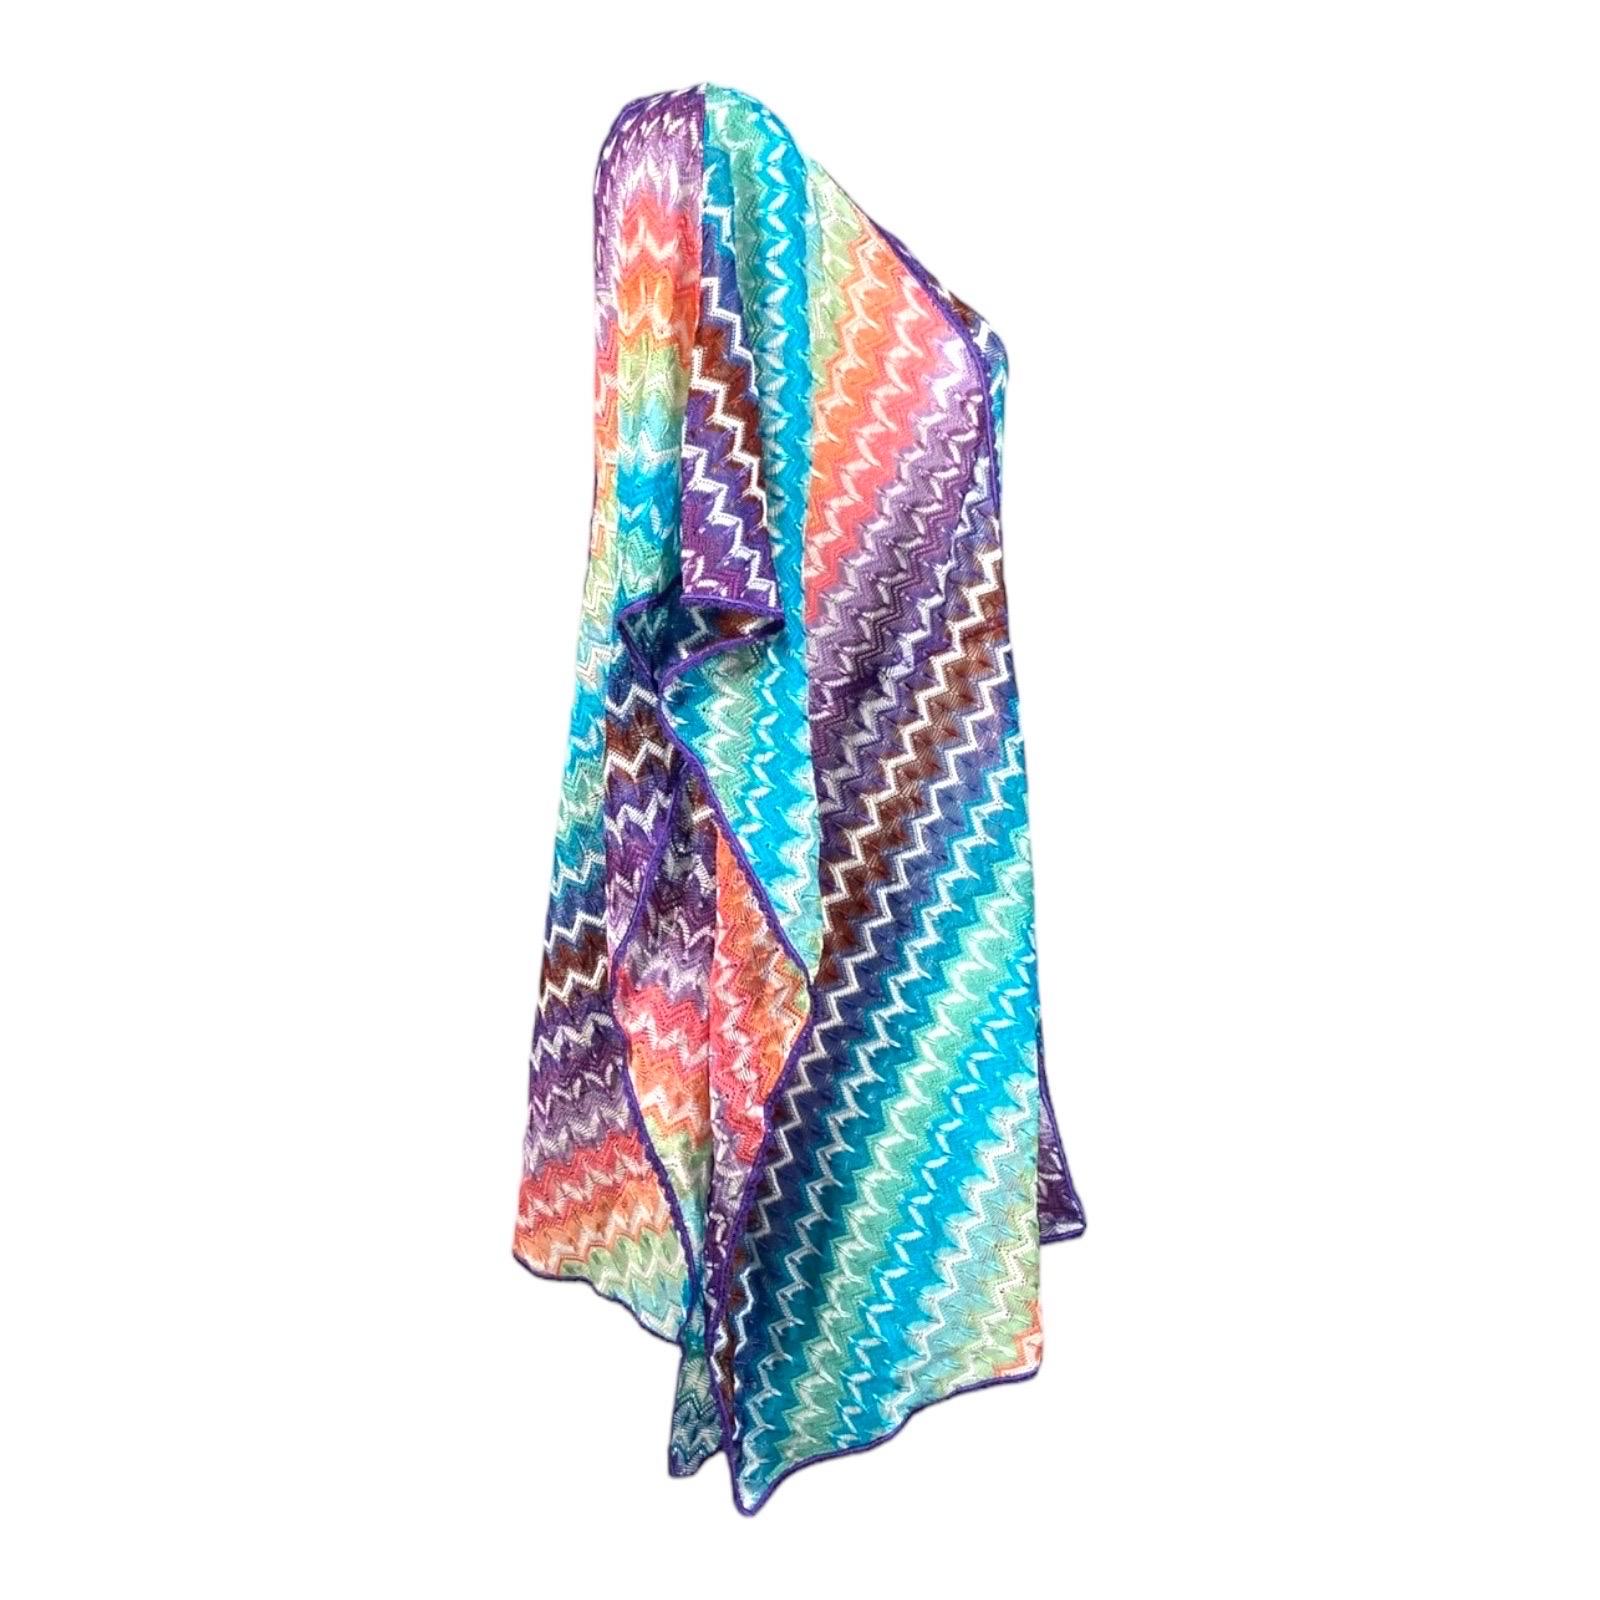 A signature Missoni knit caftan in a rainbow of colors is the only coverup you'll need this summer season

Multicolored knitted Missoni kaftan in beautiul pastels
Drawstring detail at waist for a perfect fit
Simply slips on
Made in Italy
Dry Clean